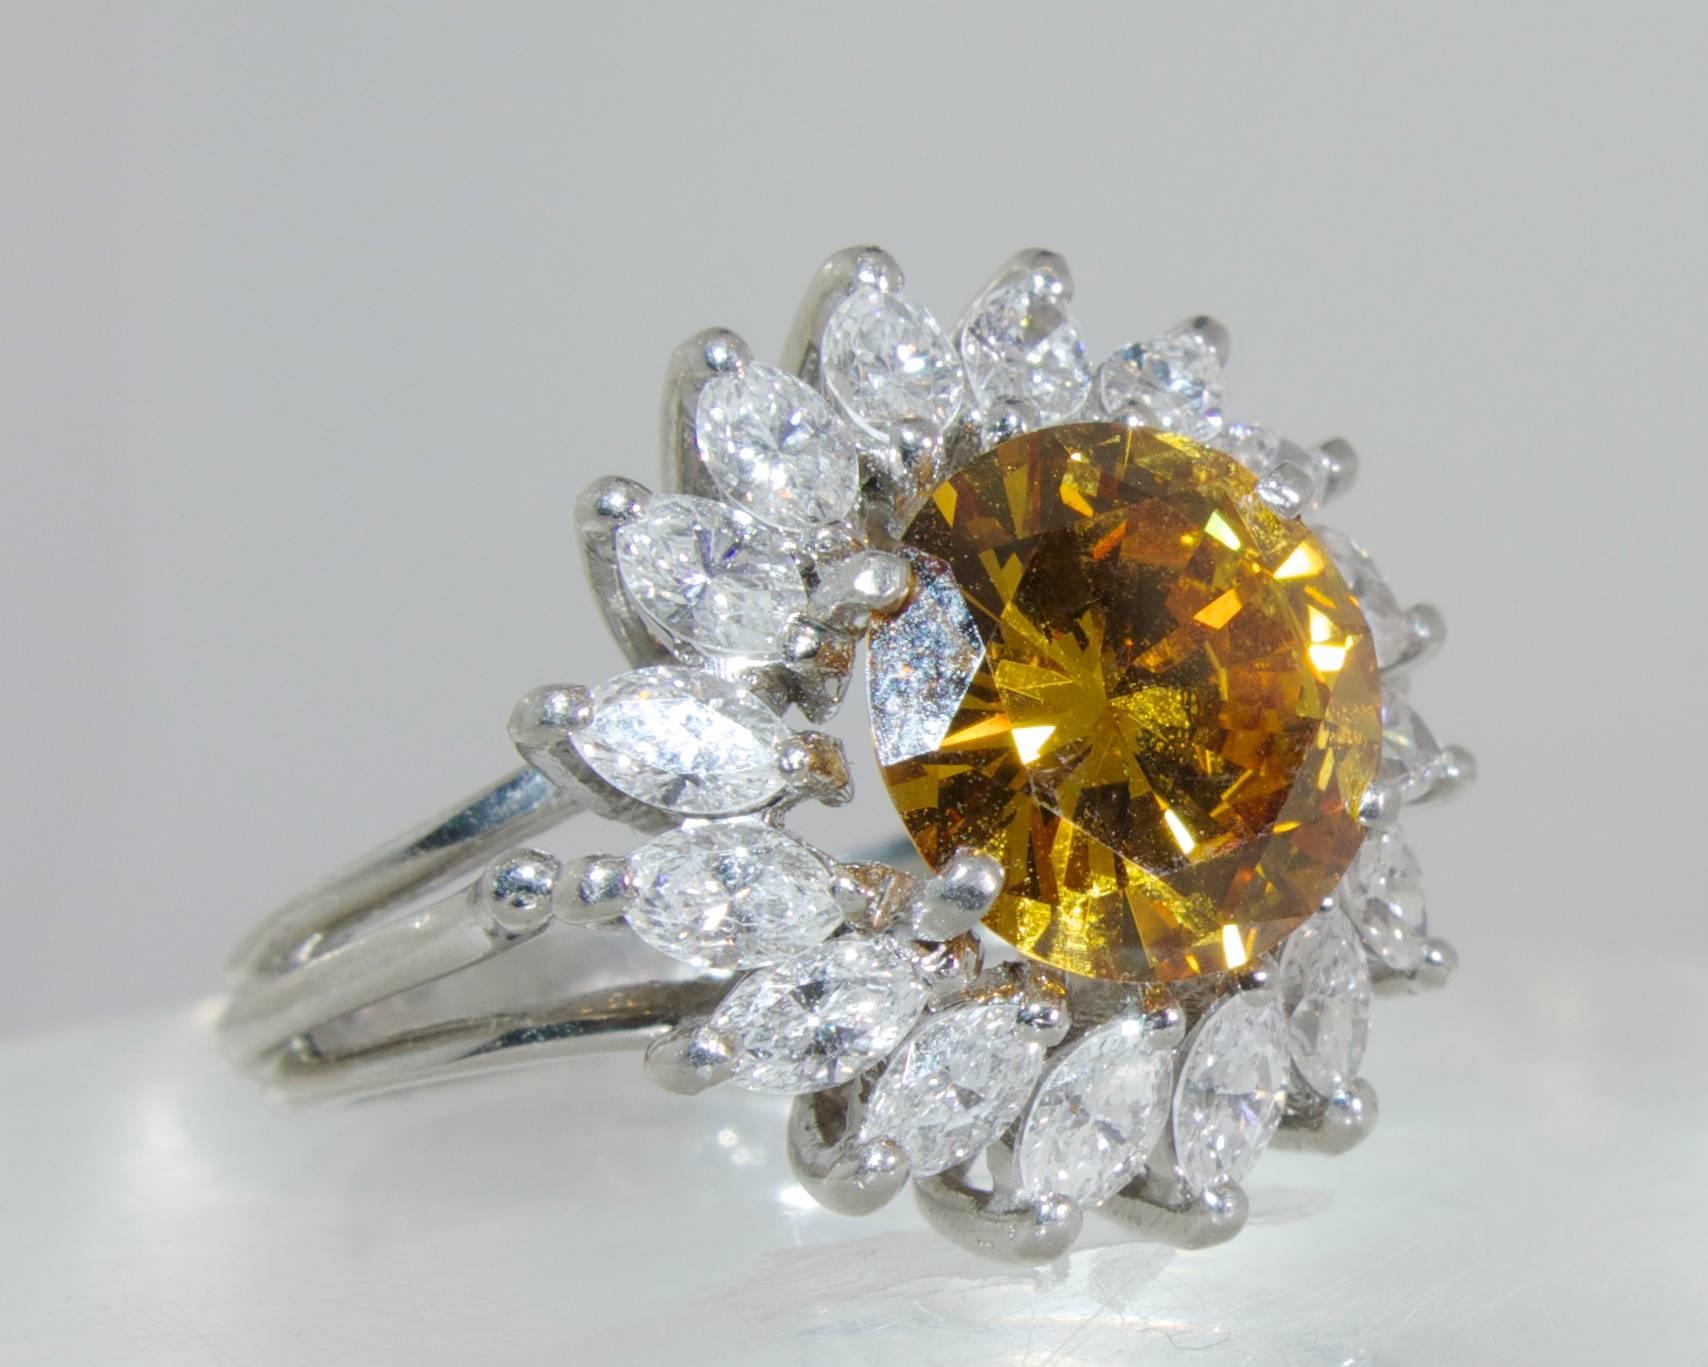 The center brilliant cut diamond displays a bright cognac color, it weighs 2.68 cts.  This diamond has been examined by the G.I.A. (Report No. 2430550), and is treated color.  The white marquis cut diamonds surrounding this stone weigh approximately